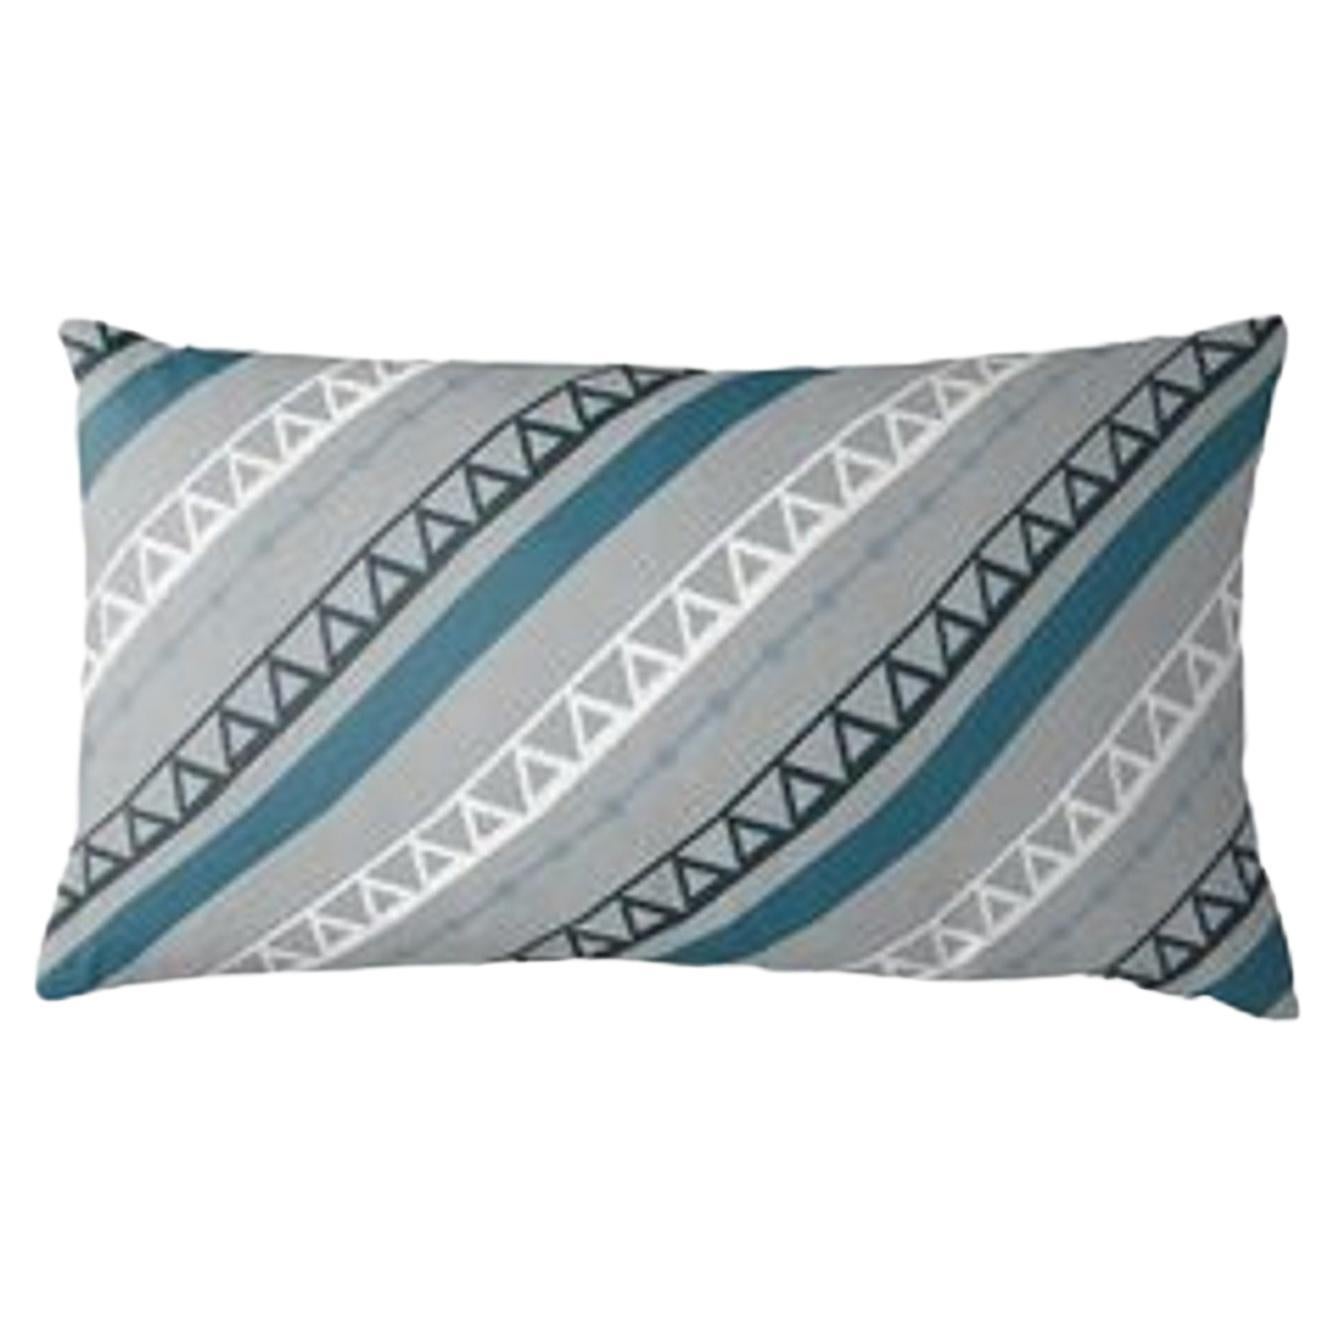 Ndop Blue and Gray Lumbar Pillow For Sale